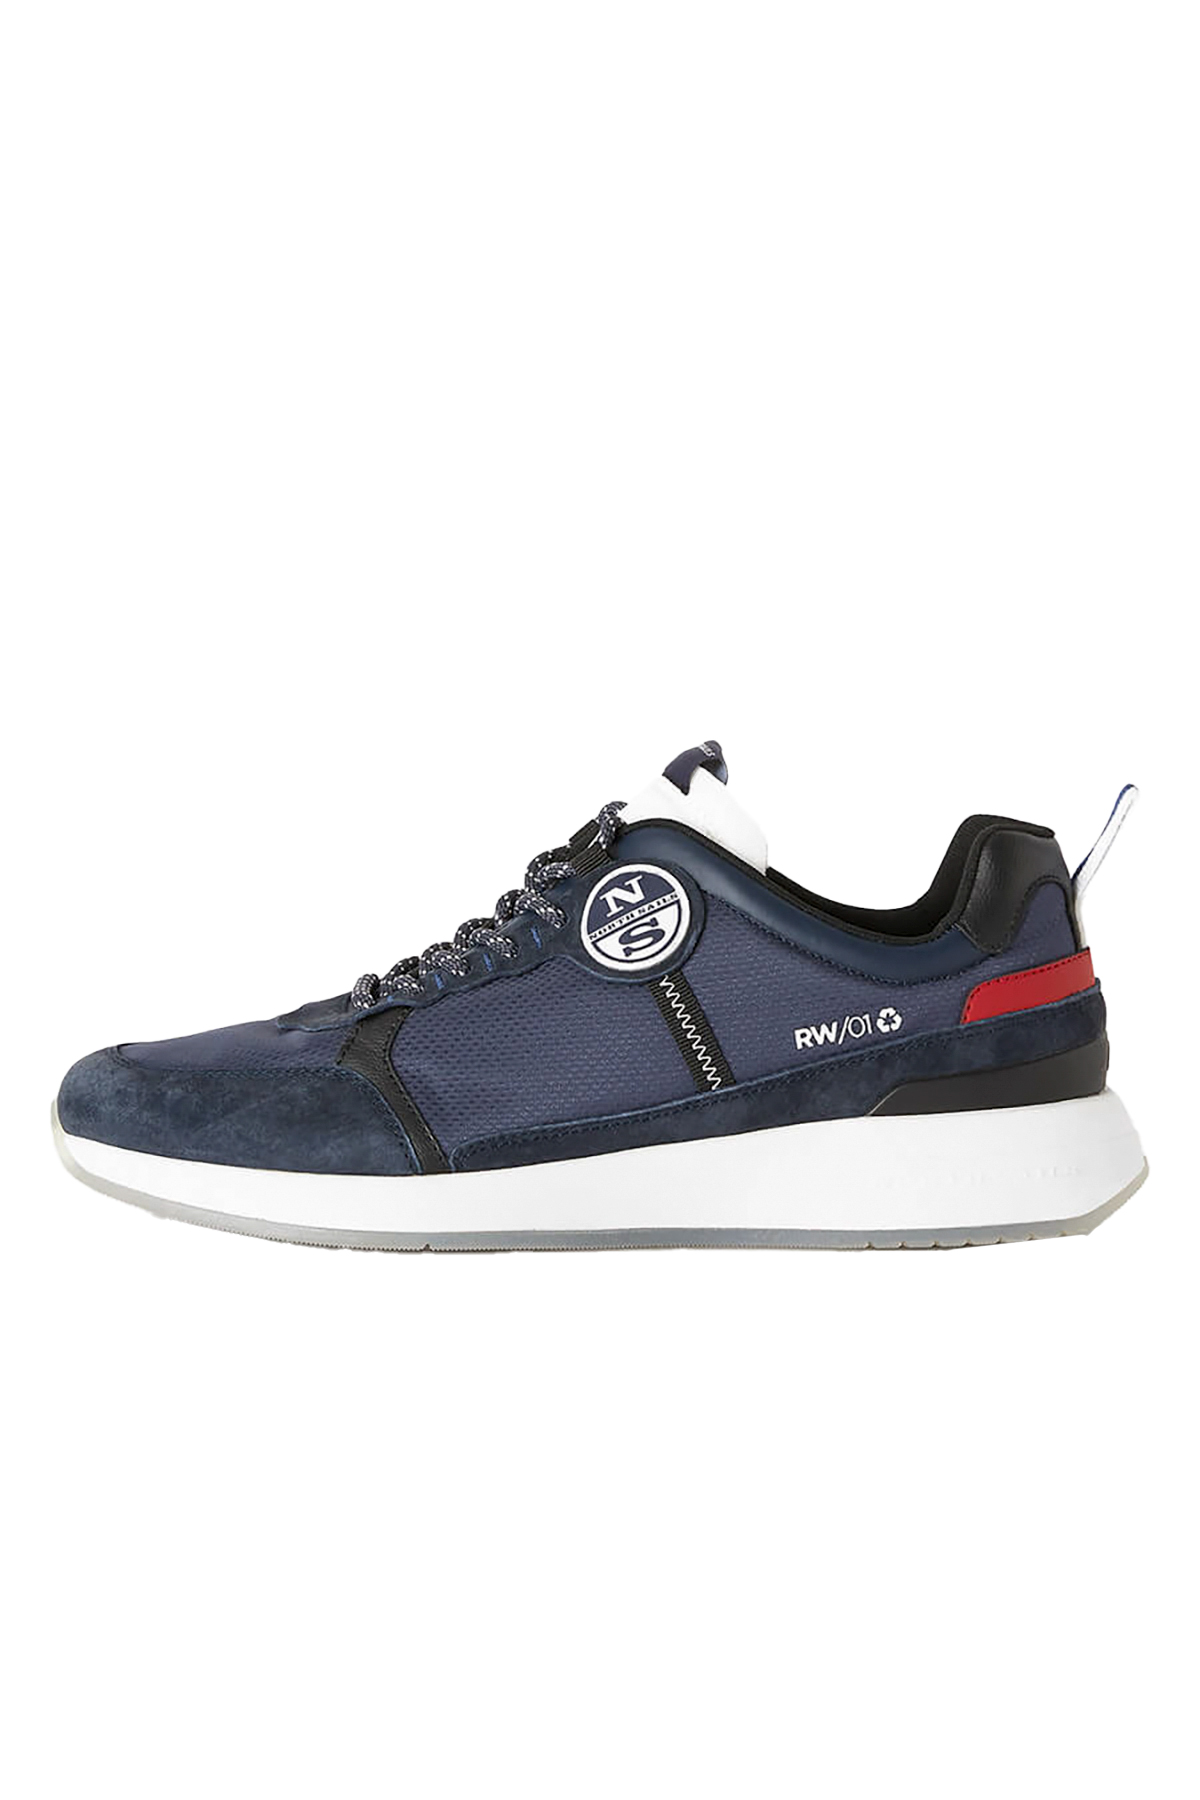 North Sails Recy Nylon Sneakers